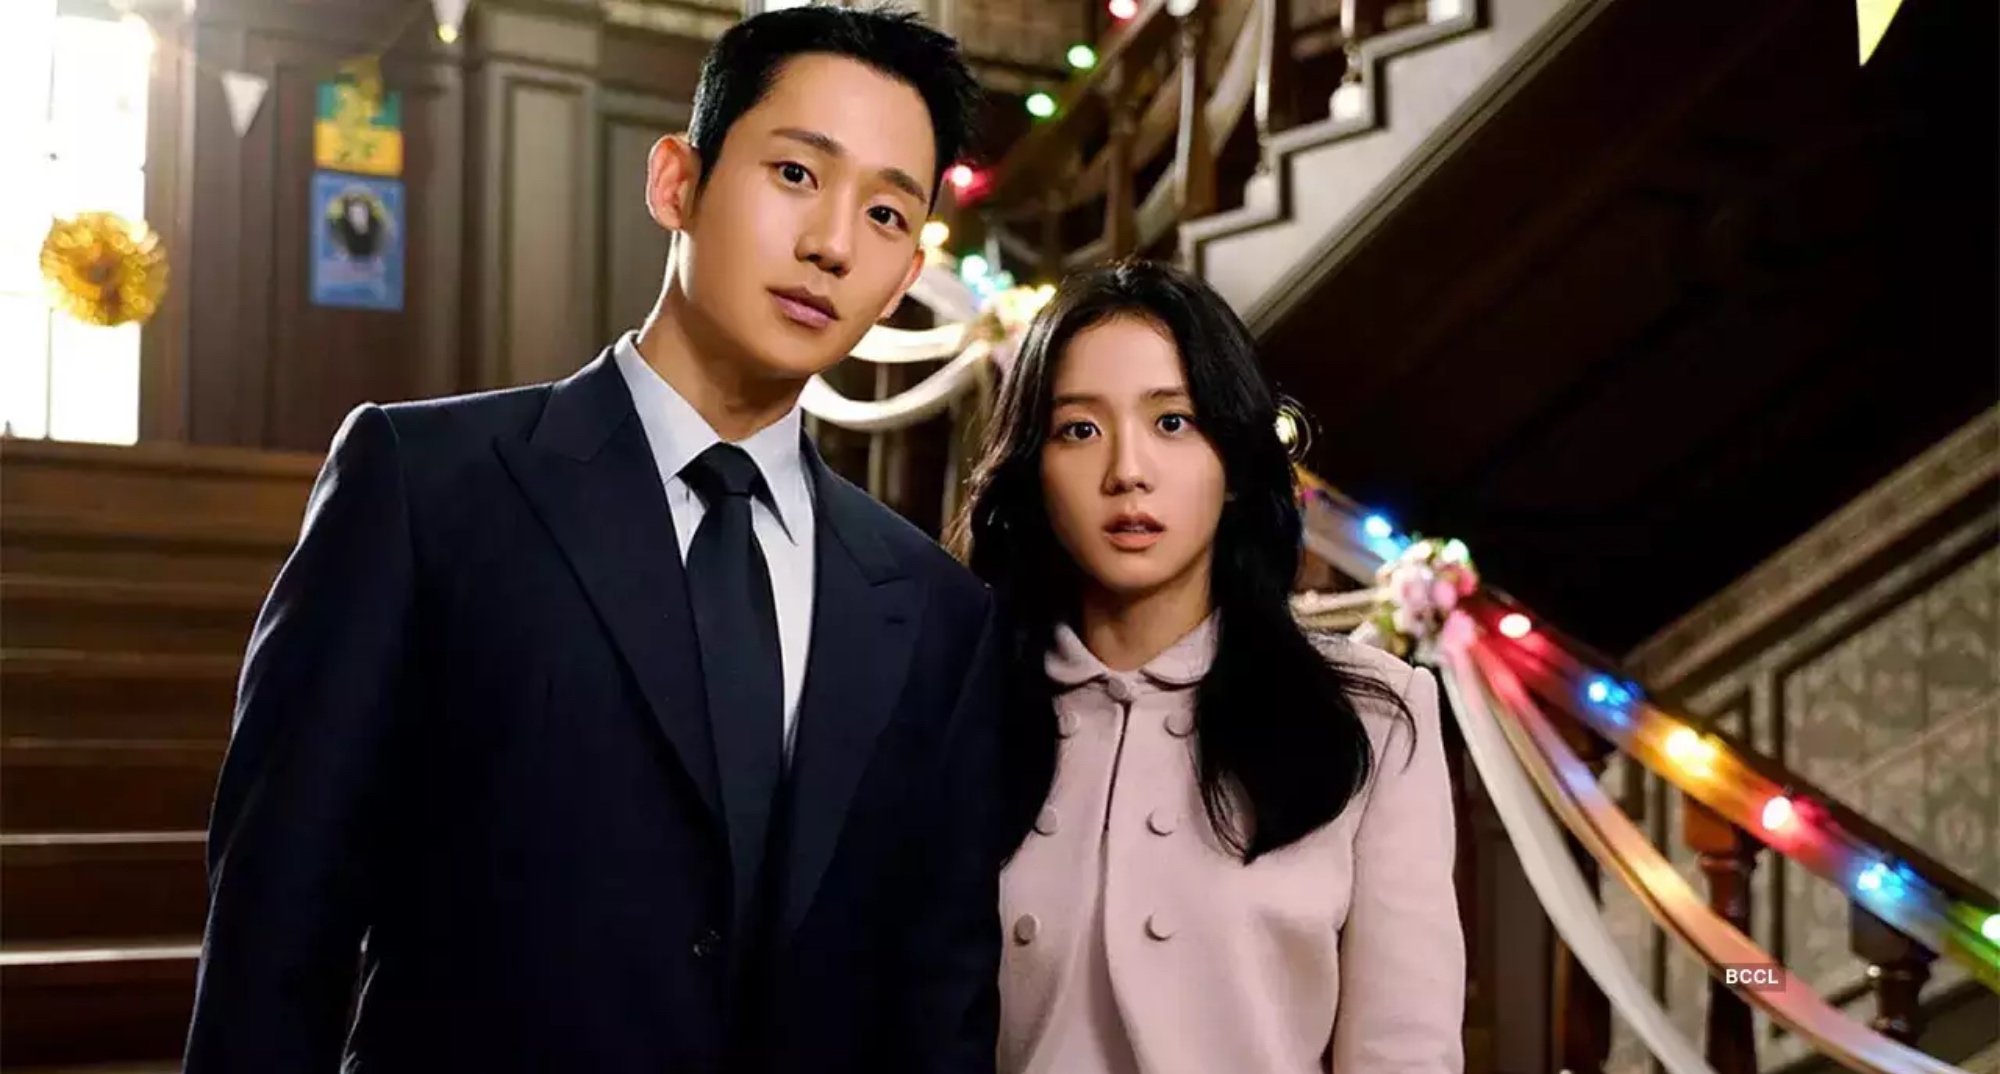 Jung Hae-in and Jisoo in JTBC 'Snowdrop' wearing suit and dress.